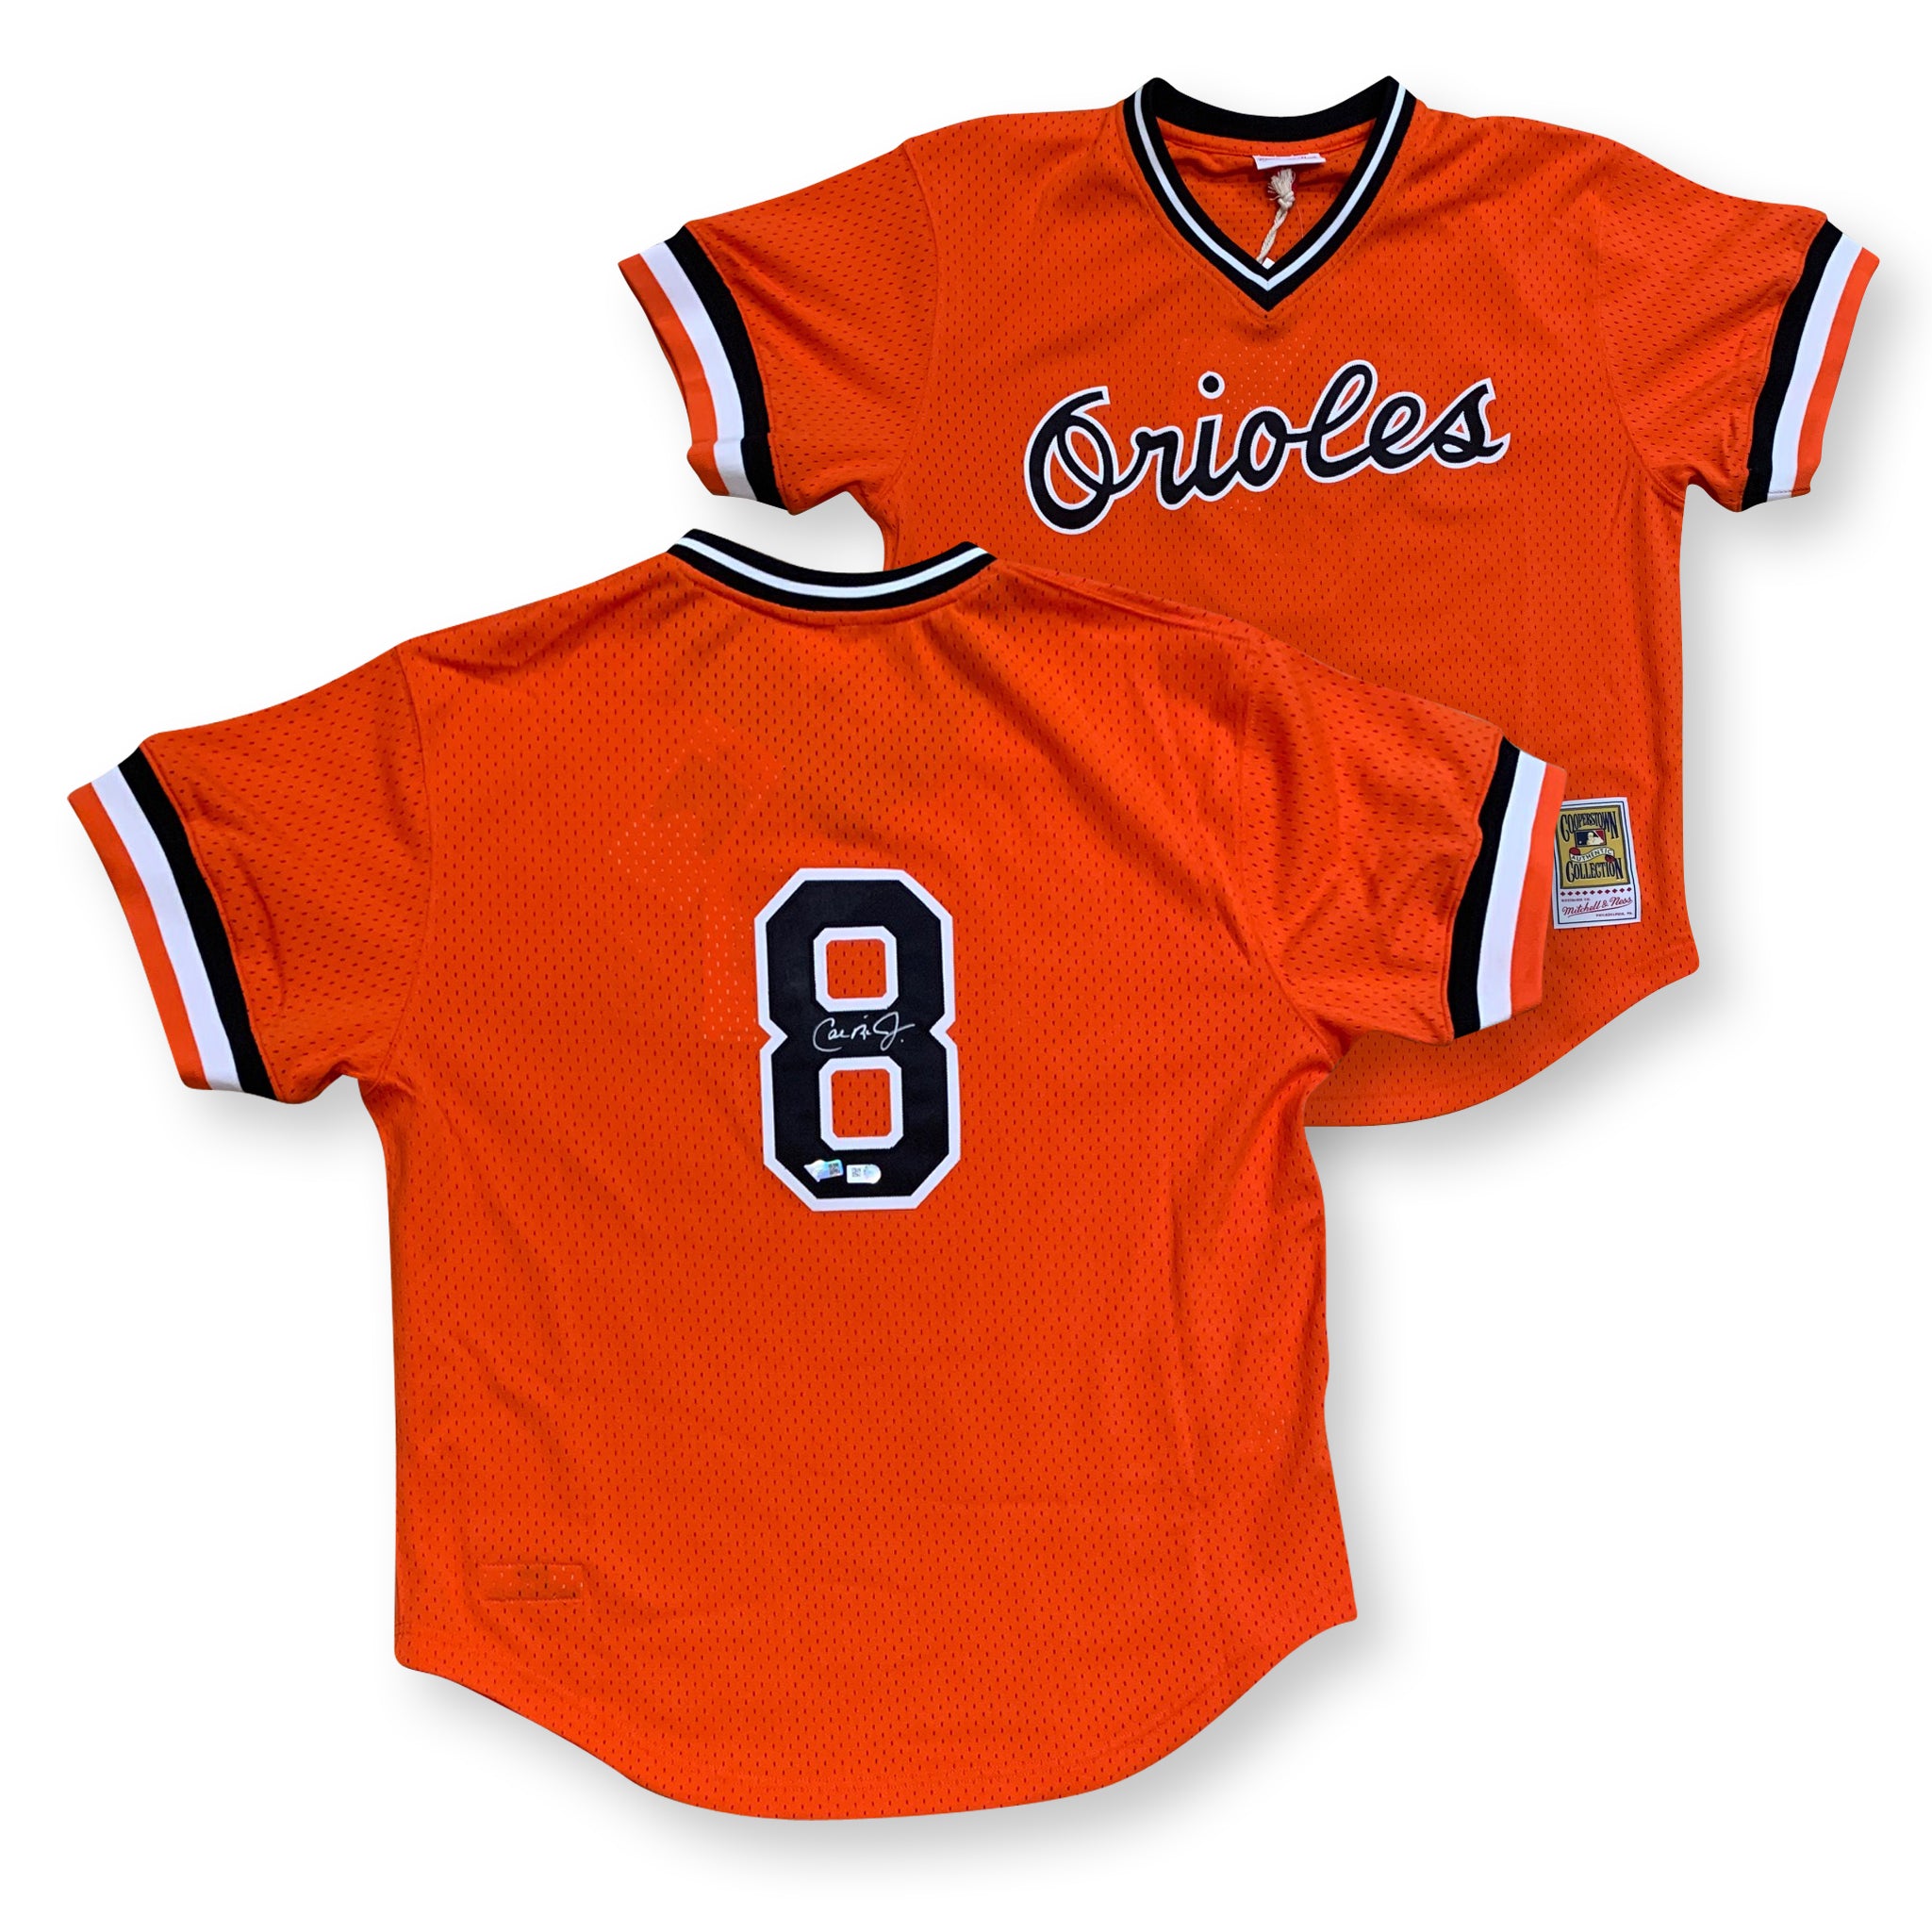 Mitchell & Ness MLB Authentic JERSEY-pullover - Baltimore Orioles -MENS- Orange/Black S